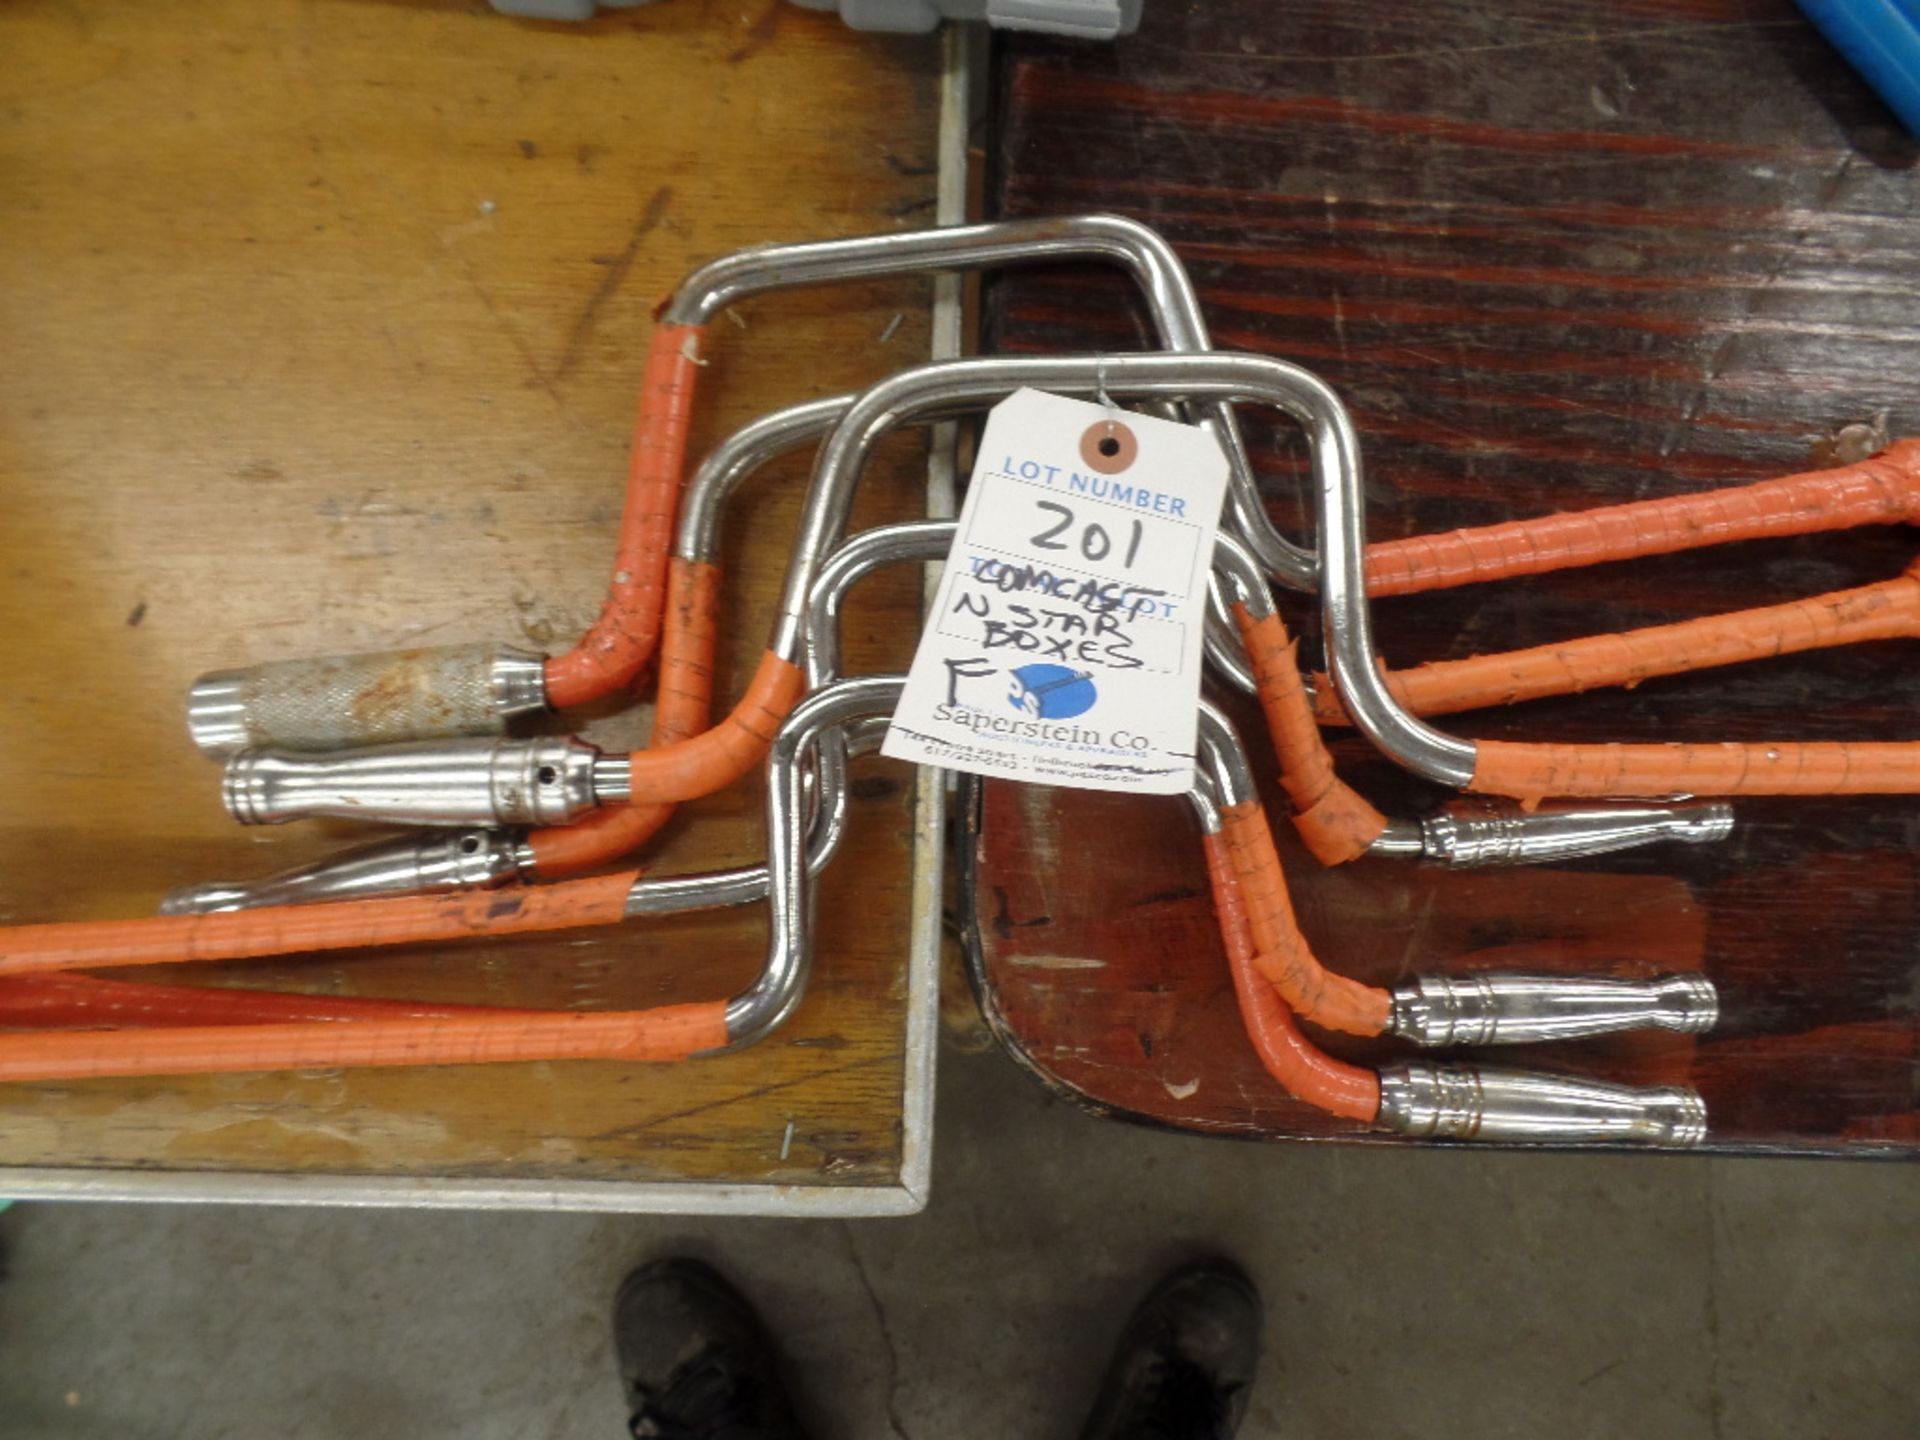 (6) Speeder Wrenches Nstar & Comcast Sockets